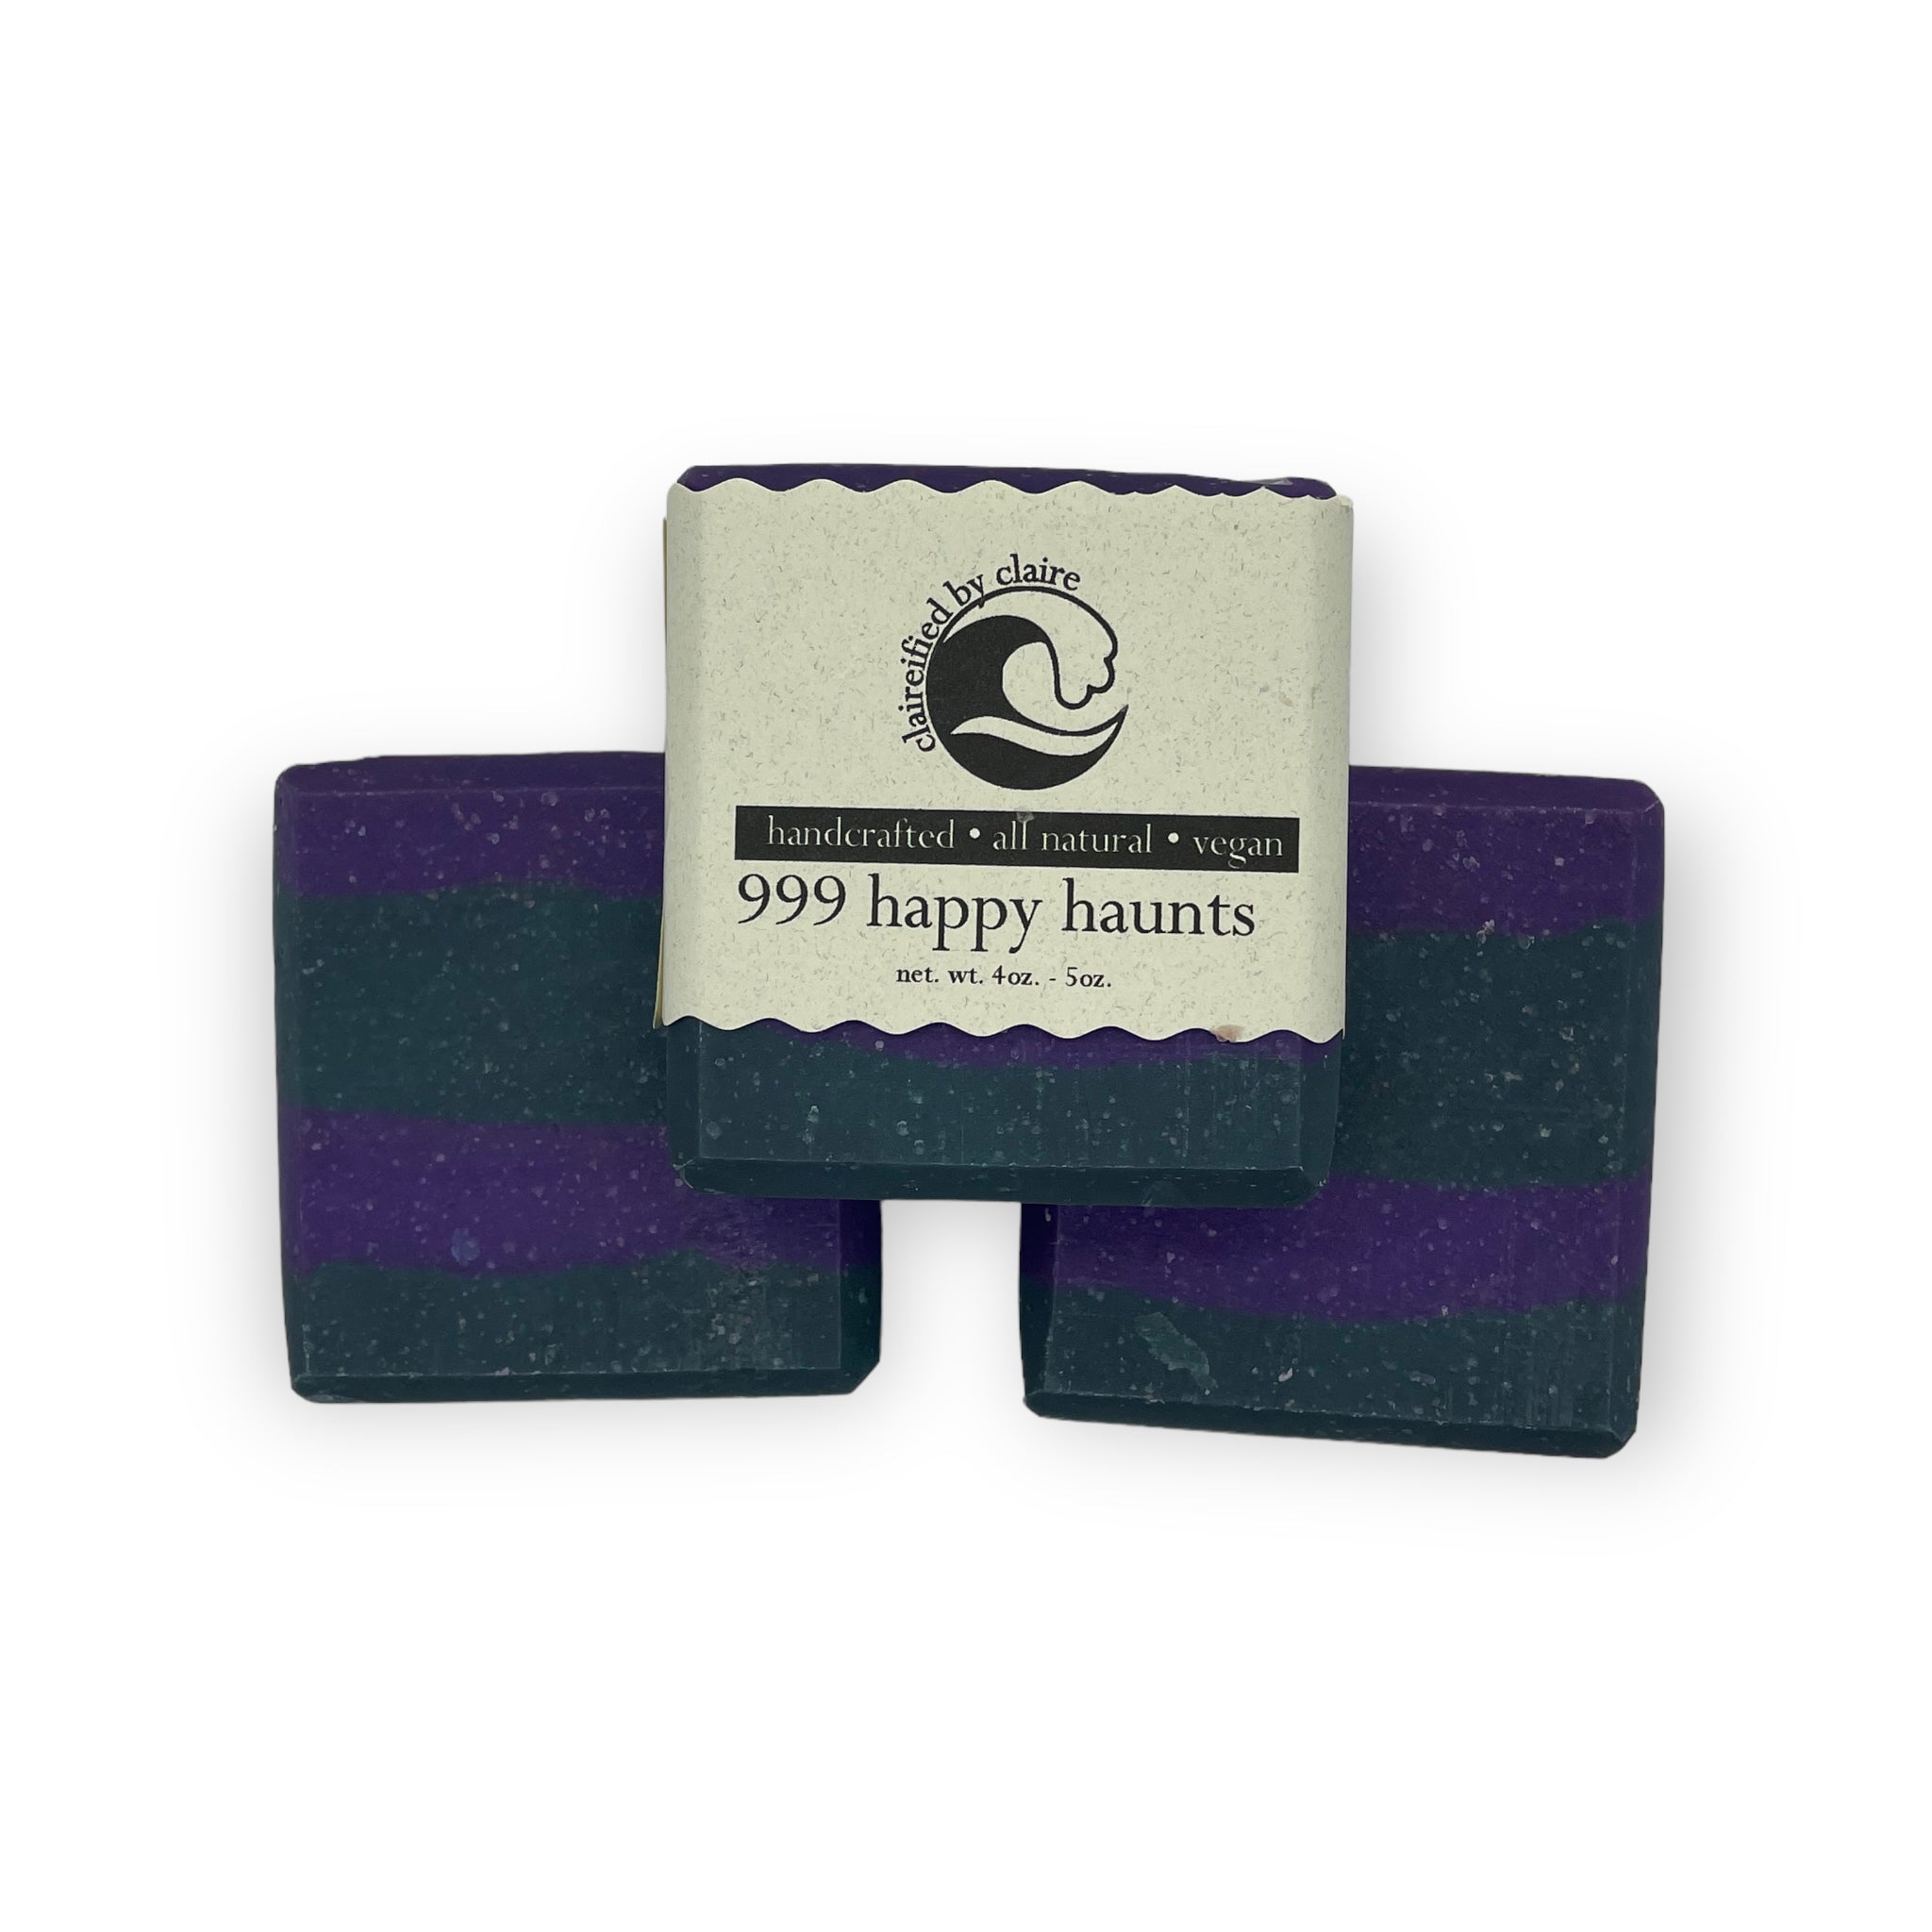 999 Happy Haunts Inspired by the Haunted Mansion Disney Ride Handmade Soap